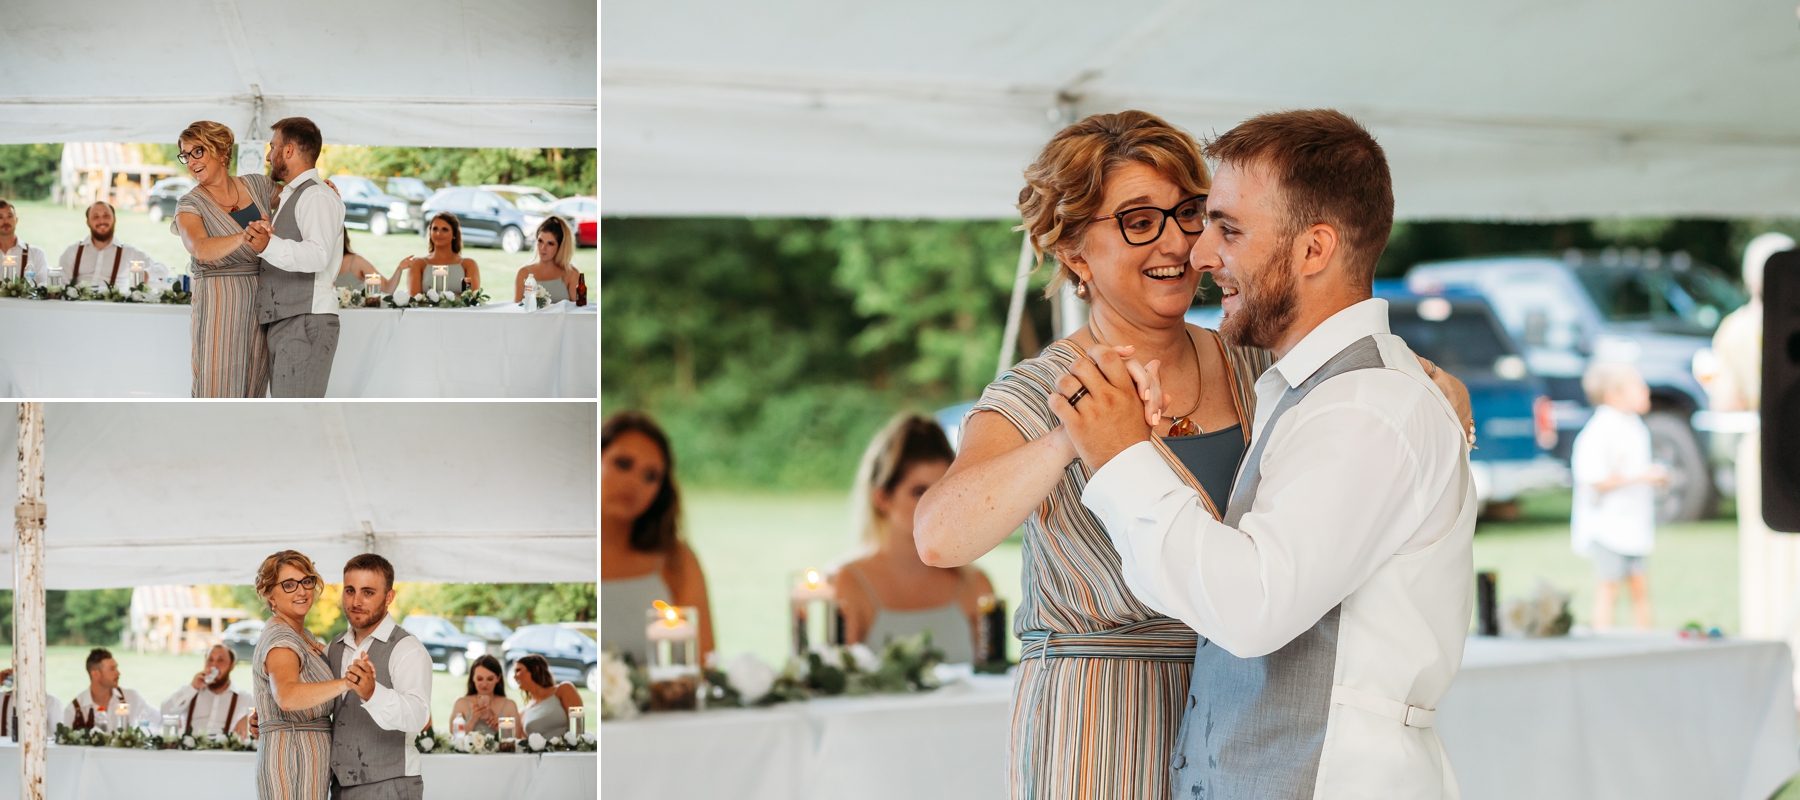 backyard wedding photography bates city missouri bride and groom brittany jewell photography mother son r dance reception white tent